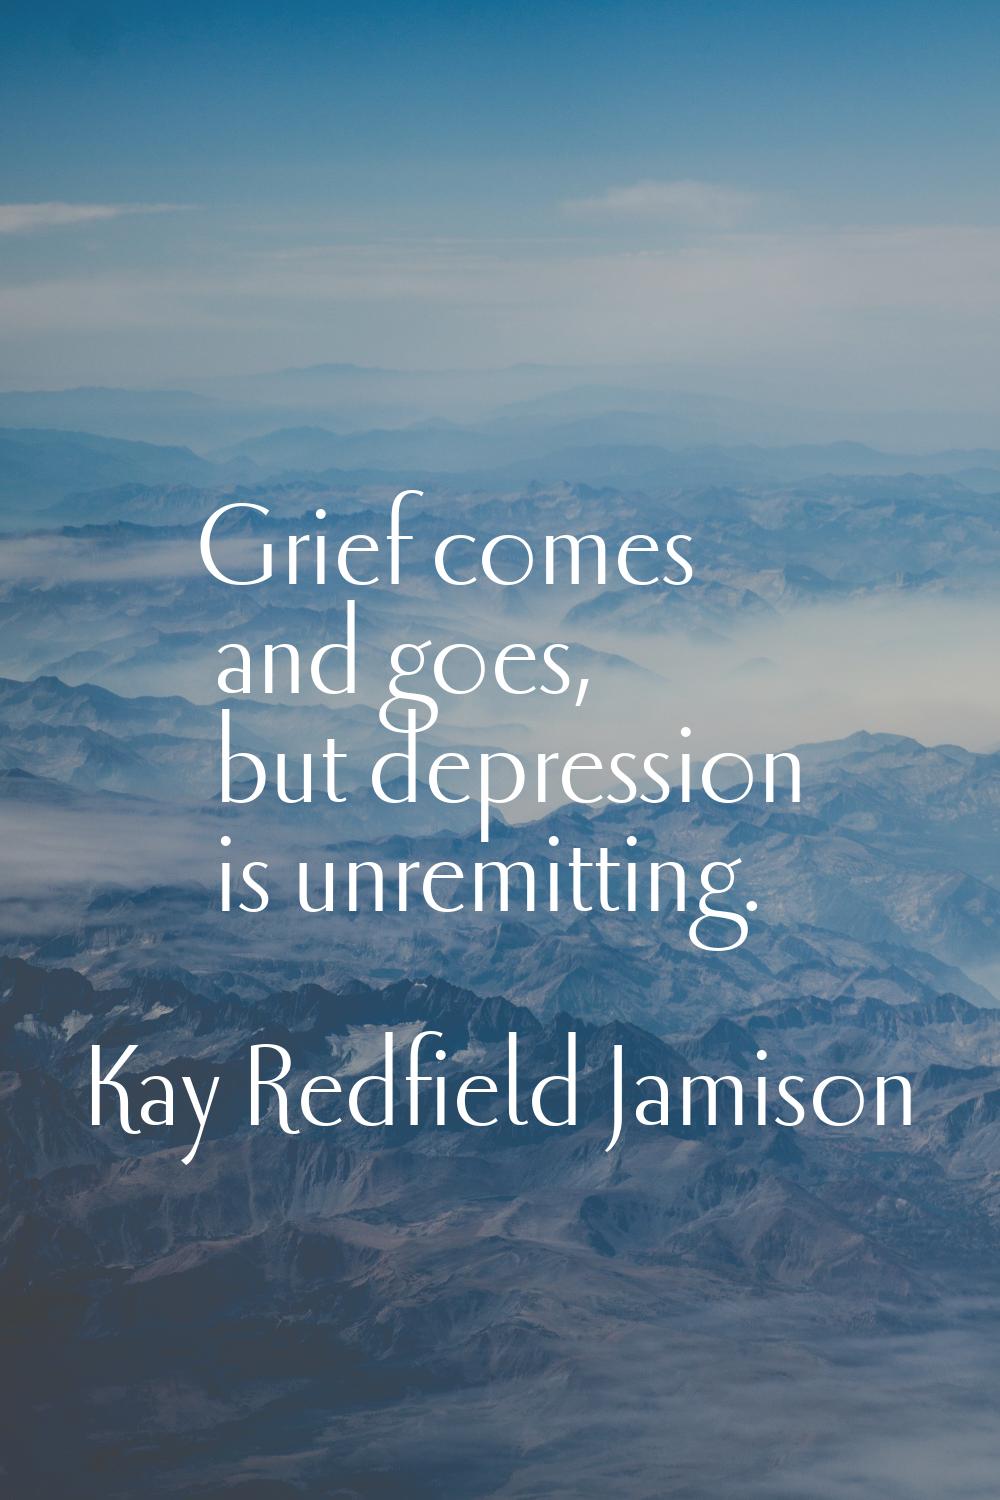 Grief comes and goes, but depression is unremitting.